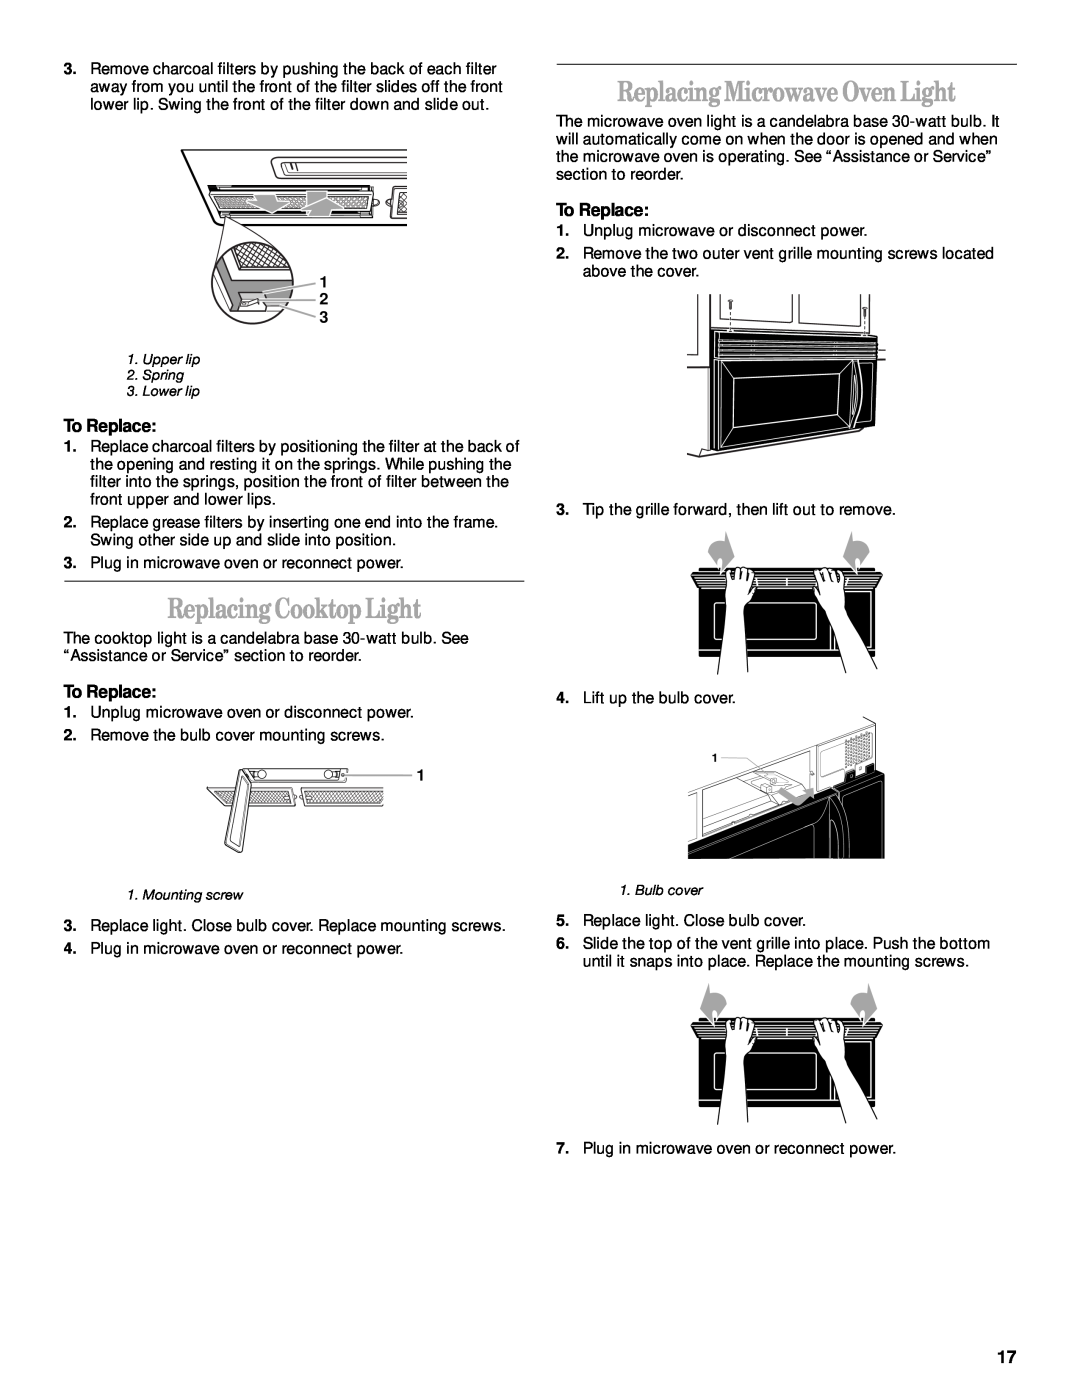 Whirlpool GH8155XJ manual Replacing Cooktop Light, Replacing Microwave Oven Light, To Replace 